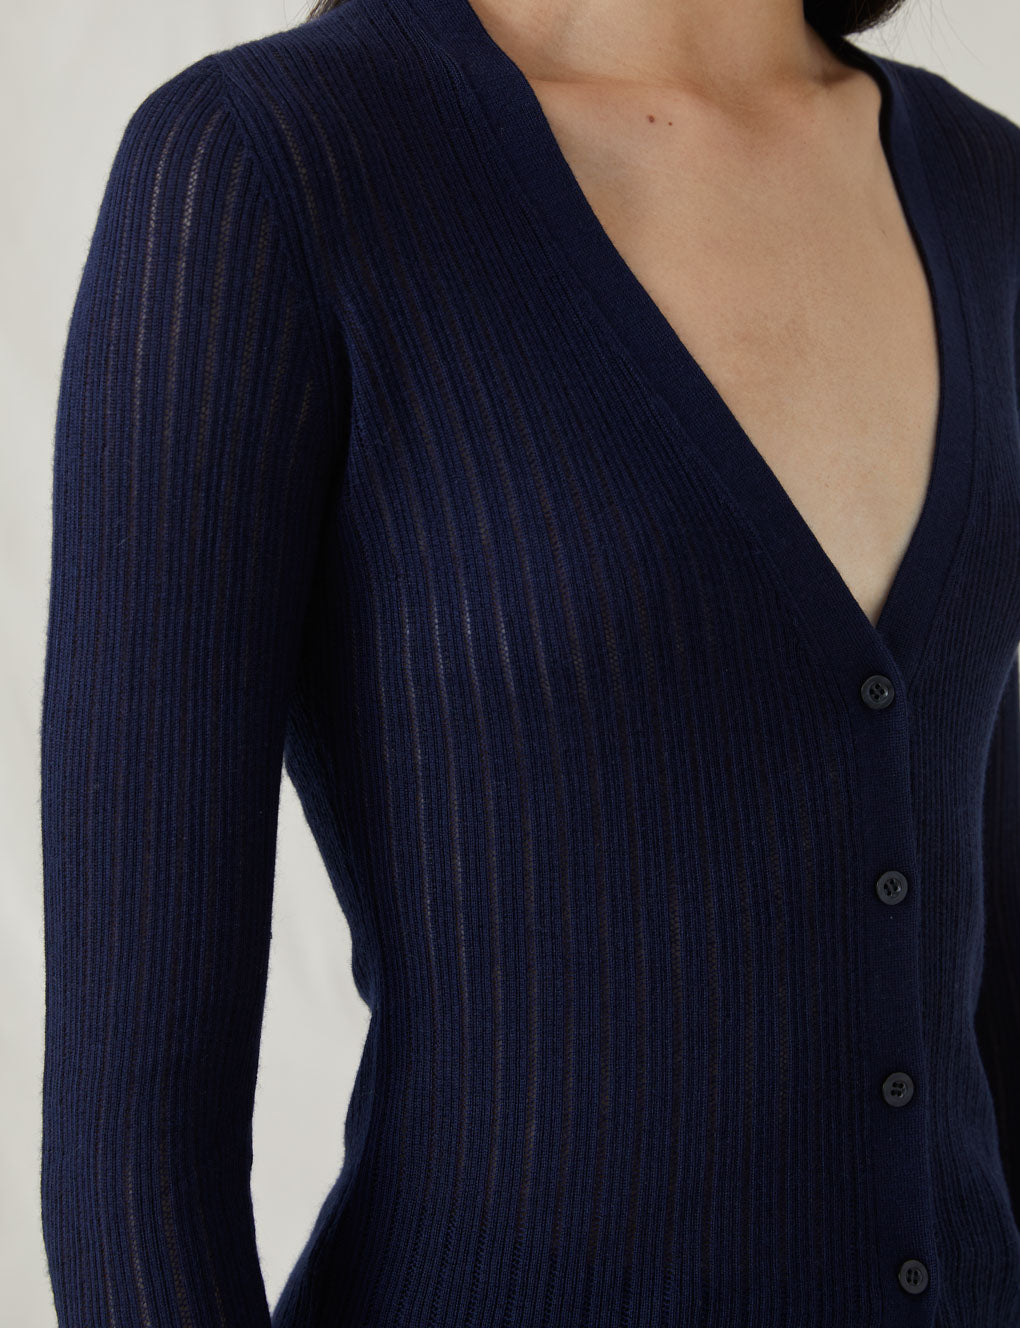 The Whisper Cardigan – Attersee